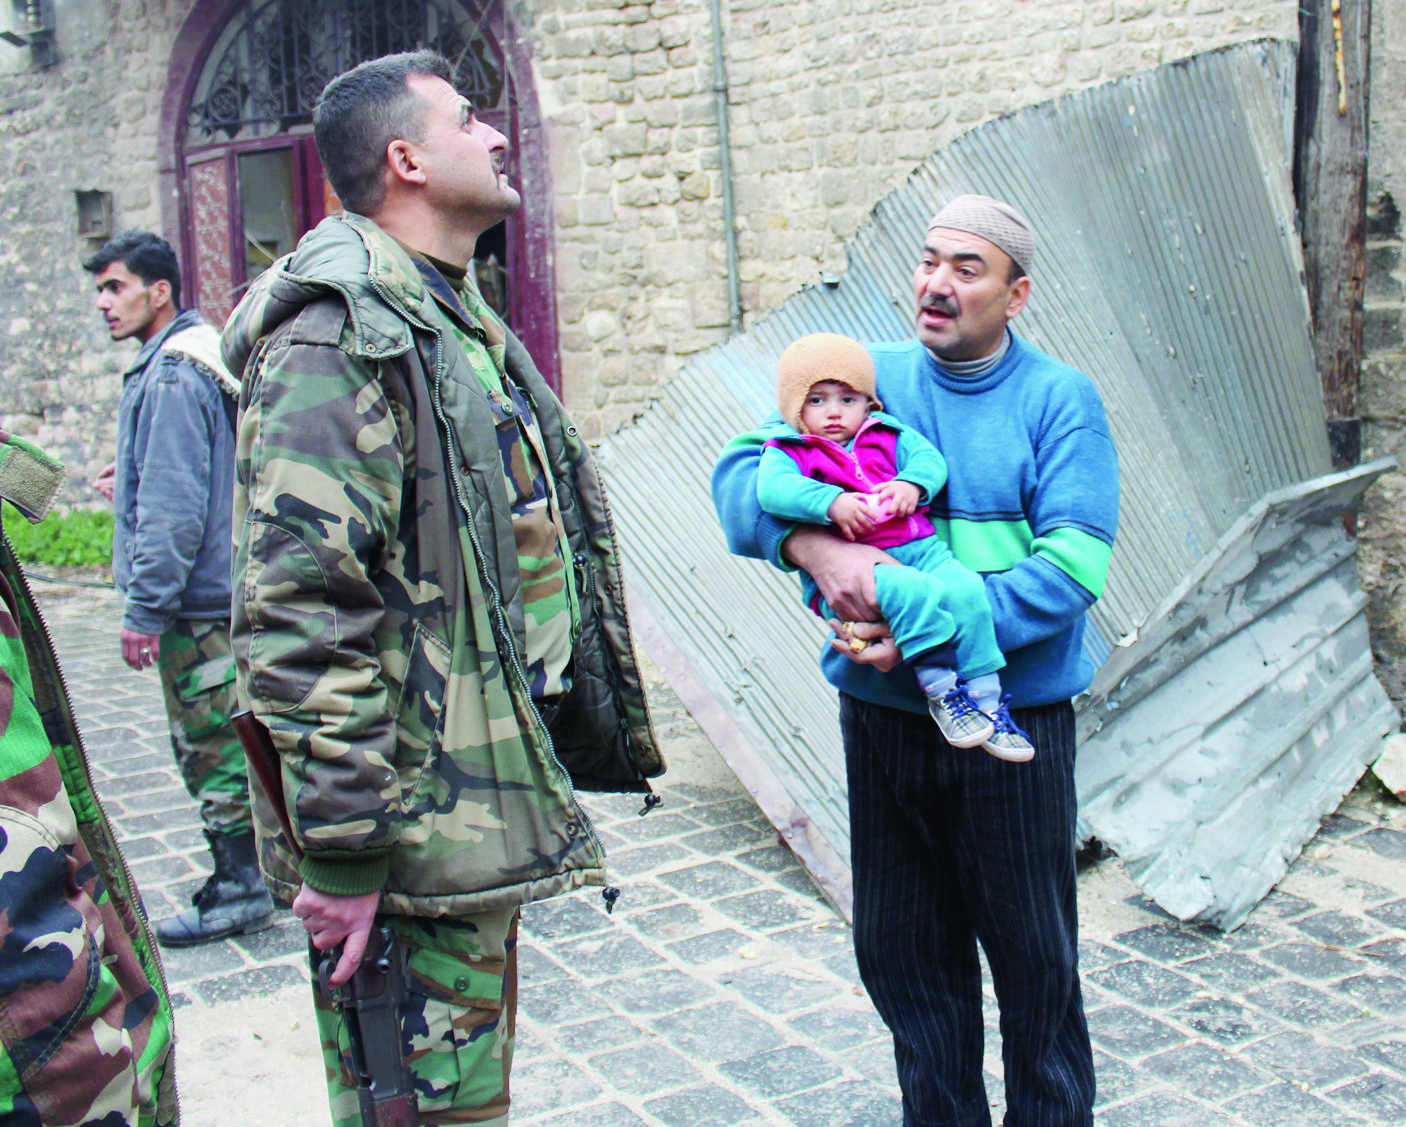 epa05674364 A a father holding his son talks with a Syrian soldier in the old markets of the eastern neighborhoods of Aleppo, Syria, 13 December 2016. According to media reports, the army holds 99 percent of Aleppo's eastern neighborhoods. The Syrian military's media arm said that Aleppo would be announced as a safe liberated city following the exit of buses carrying gunmen from al-Ramousseh to al-Rashideen 4 in the west of Aleppo, which is still under the armed groups' control.  EPA/STRINGER  EPA/STRINGER SYRIA CONFLICT ALEPPO BATTLE